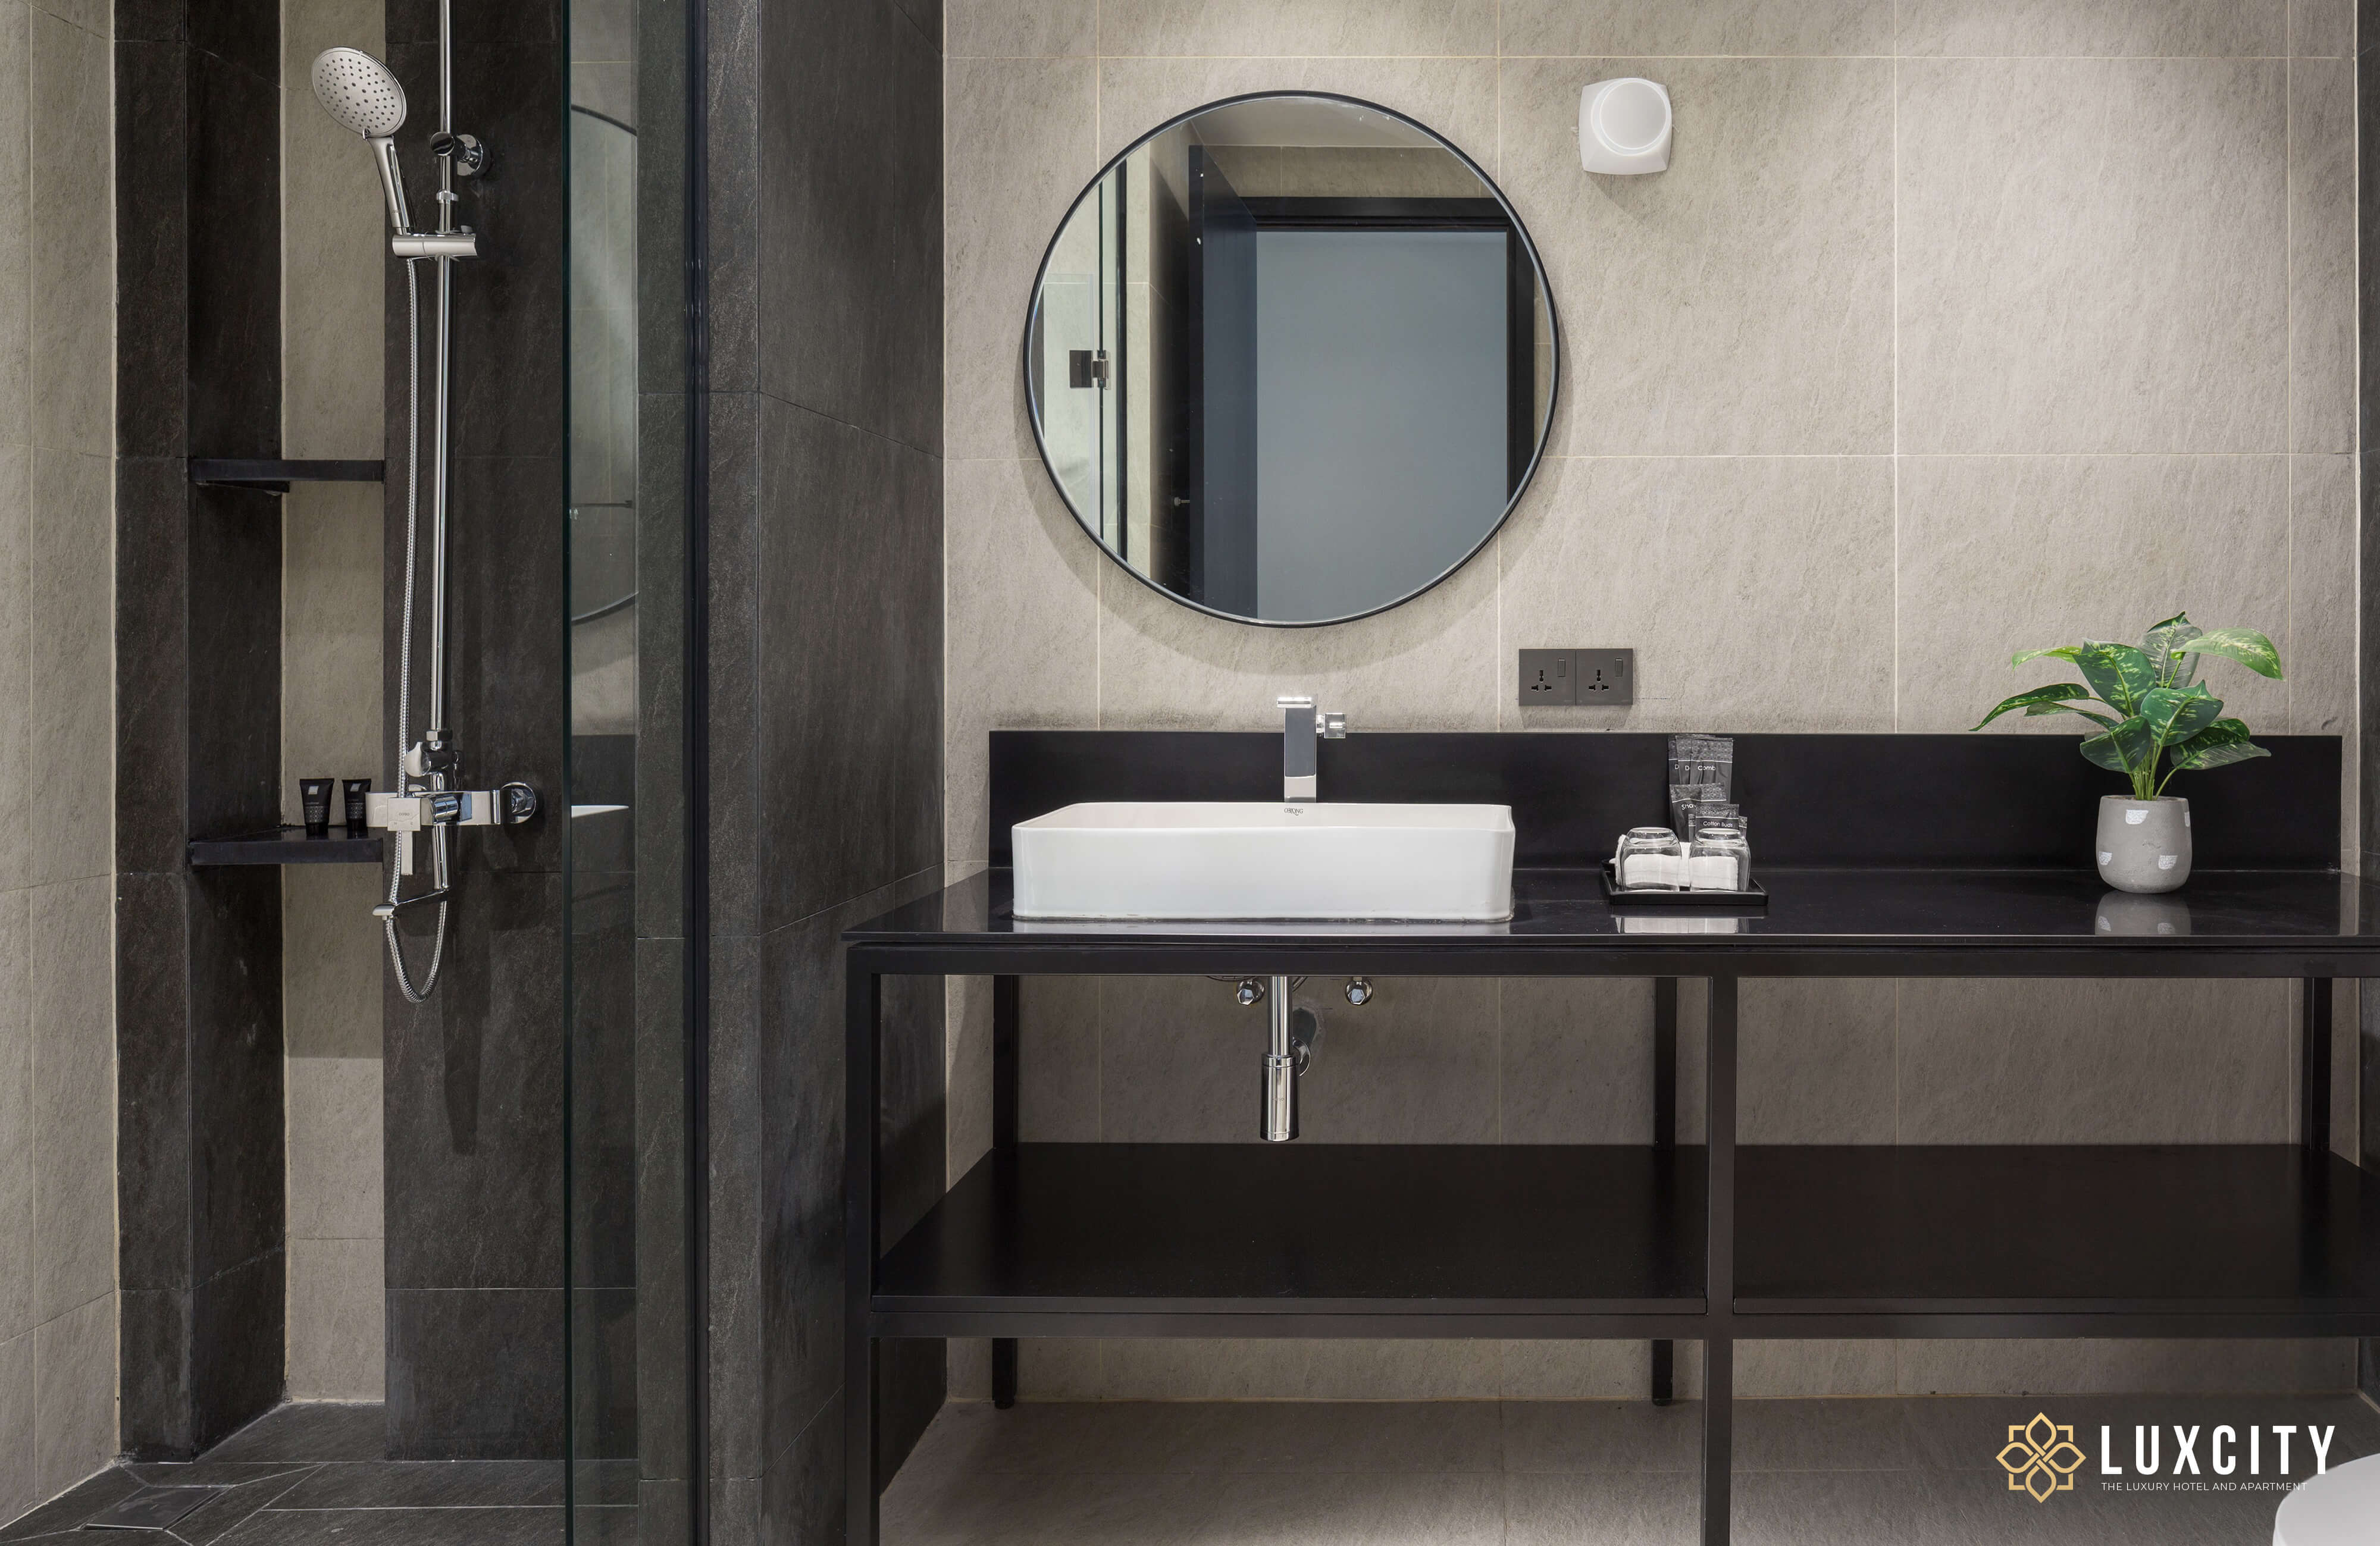 The bathroom is optimized, bringing convenience to customers